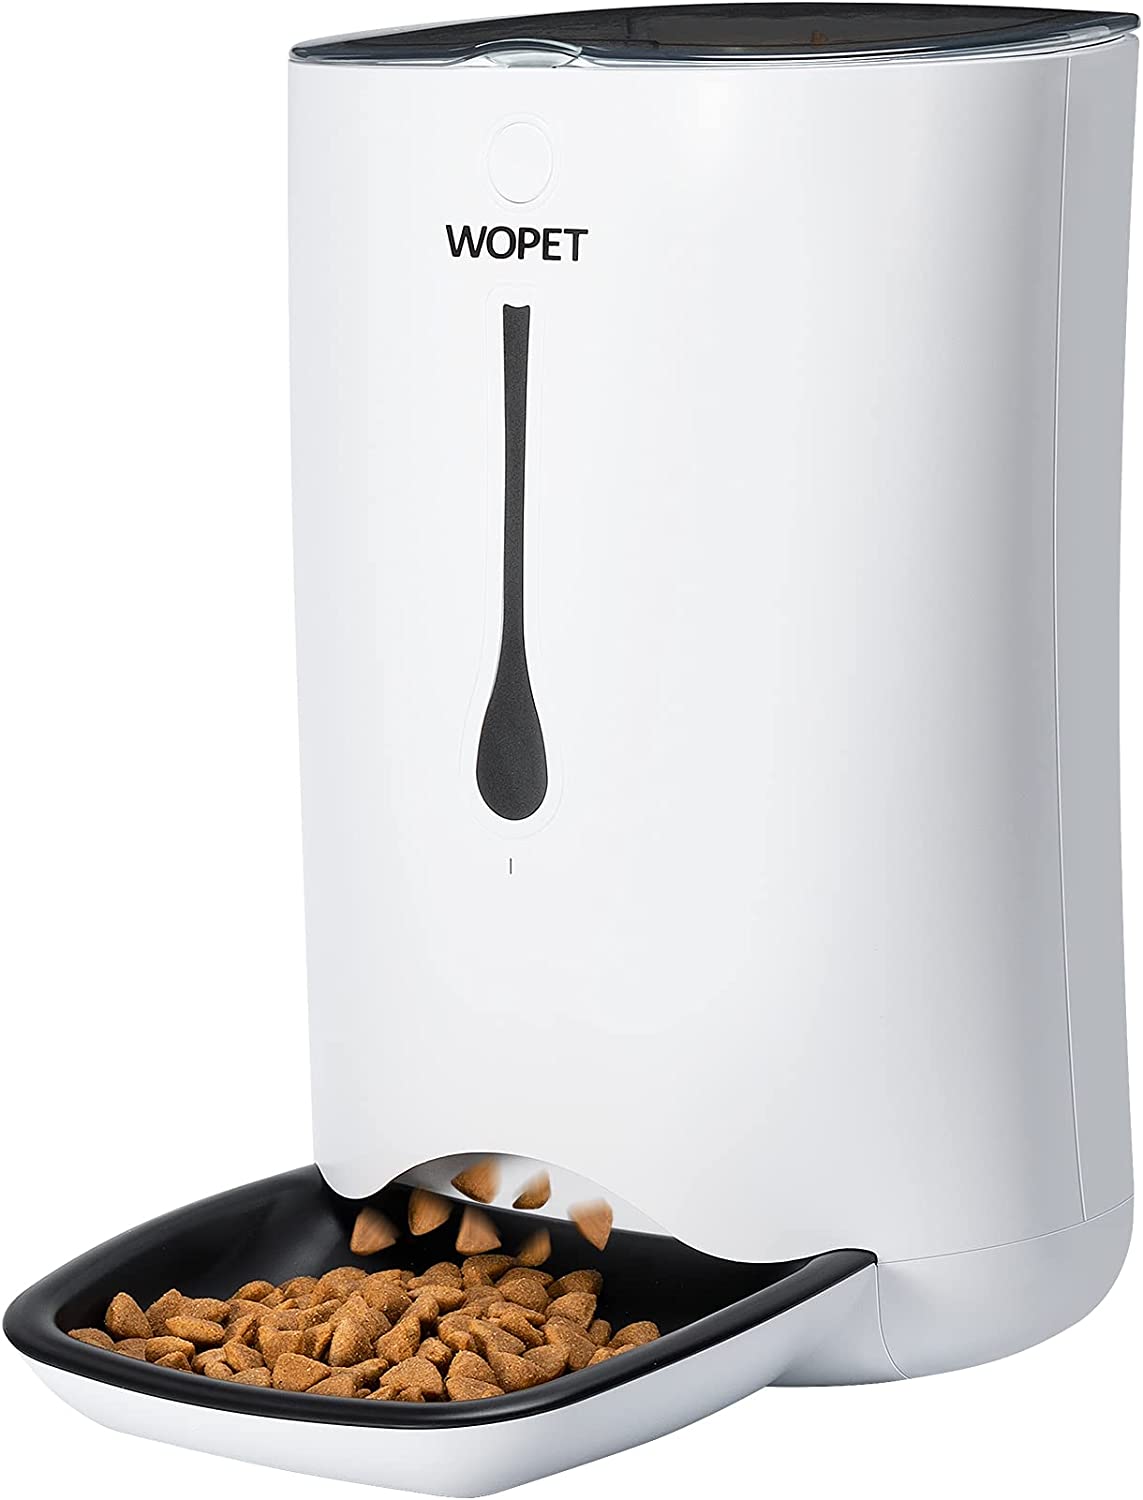 WOPET Automatic Pet Feeder Food Dispenser for Cats and Dogs–Features: Distribution Alarms, Portion Control, Voice Recorder, & Programmable Timer for up to 4 Meals per Day